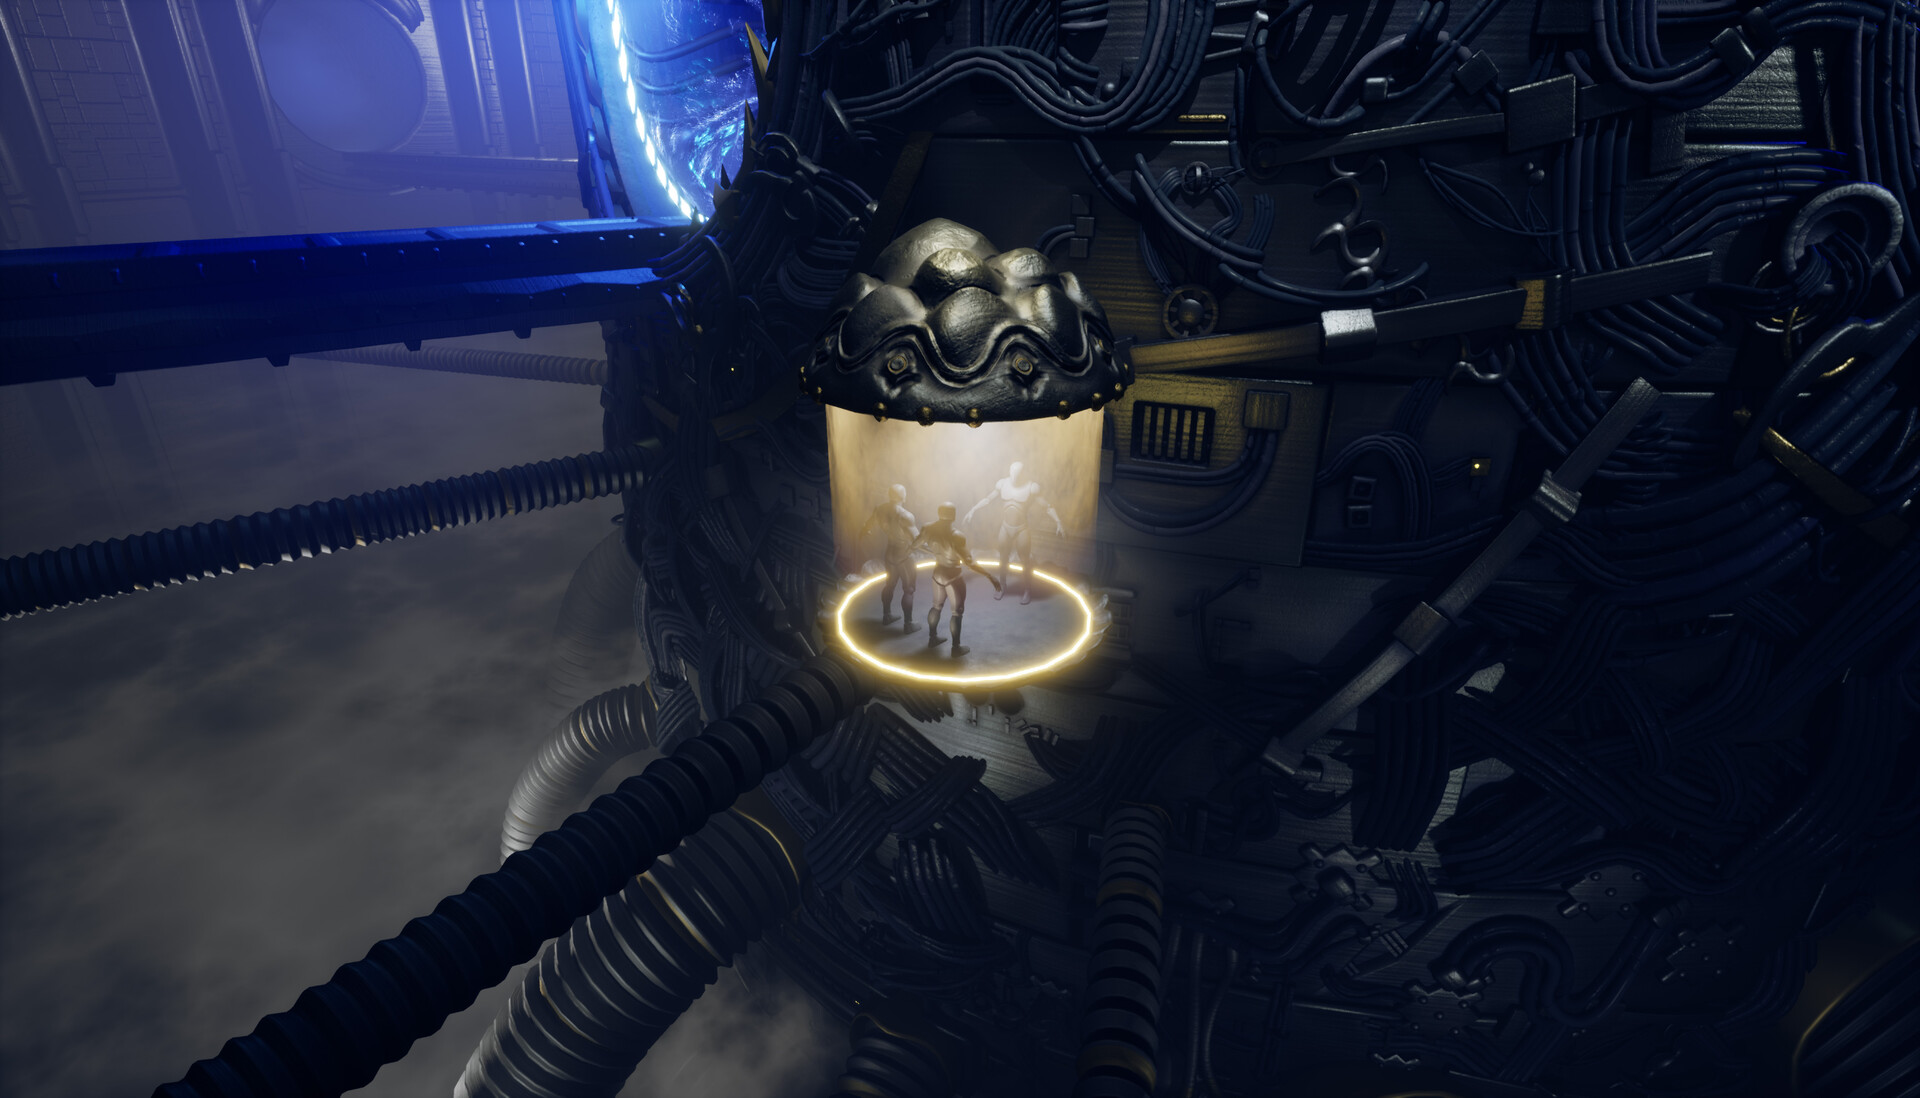 Close up screenshot of the floating platform. Its top and bottom are Zbrush sculpts showing metal with intricate carvings. In the middle of the platform stand 3 UE mannequins in an A pose. Around them is a strong, yellow emissive ring.